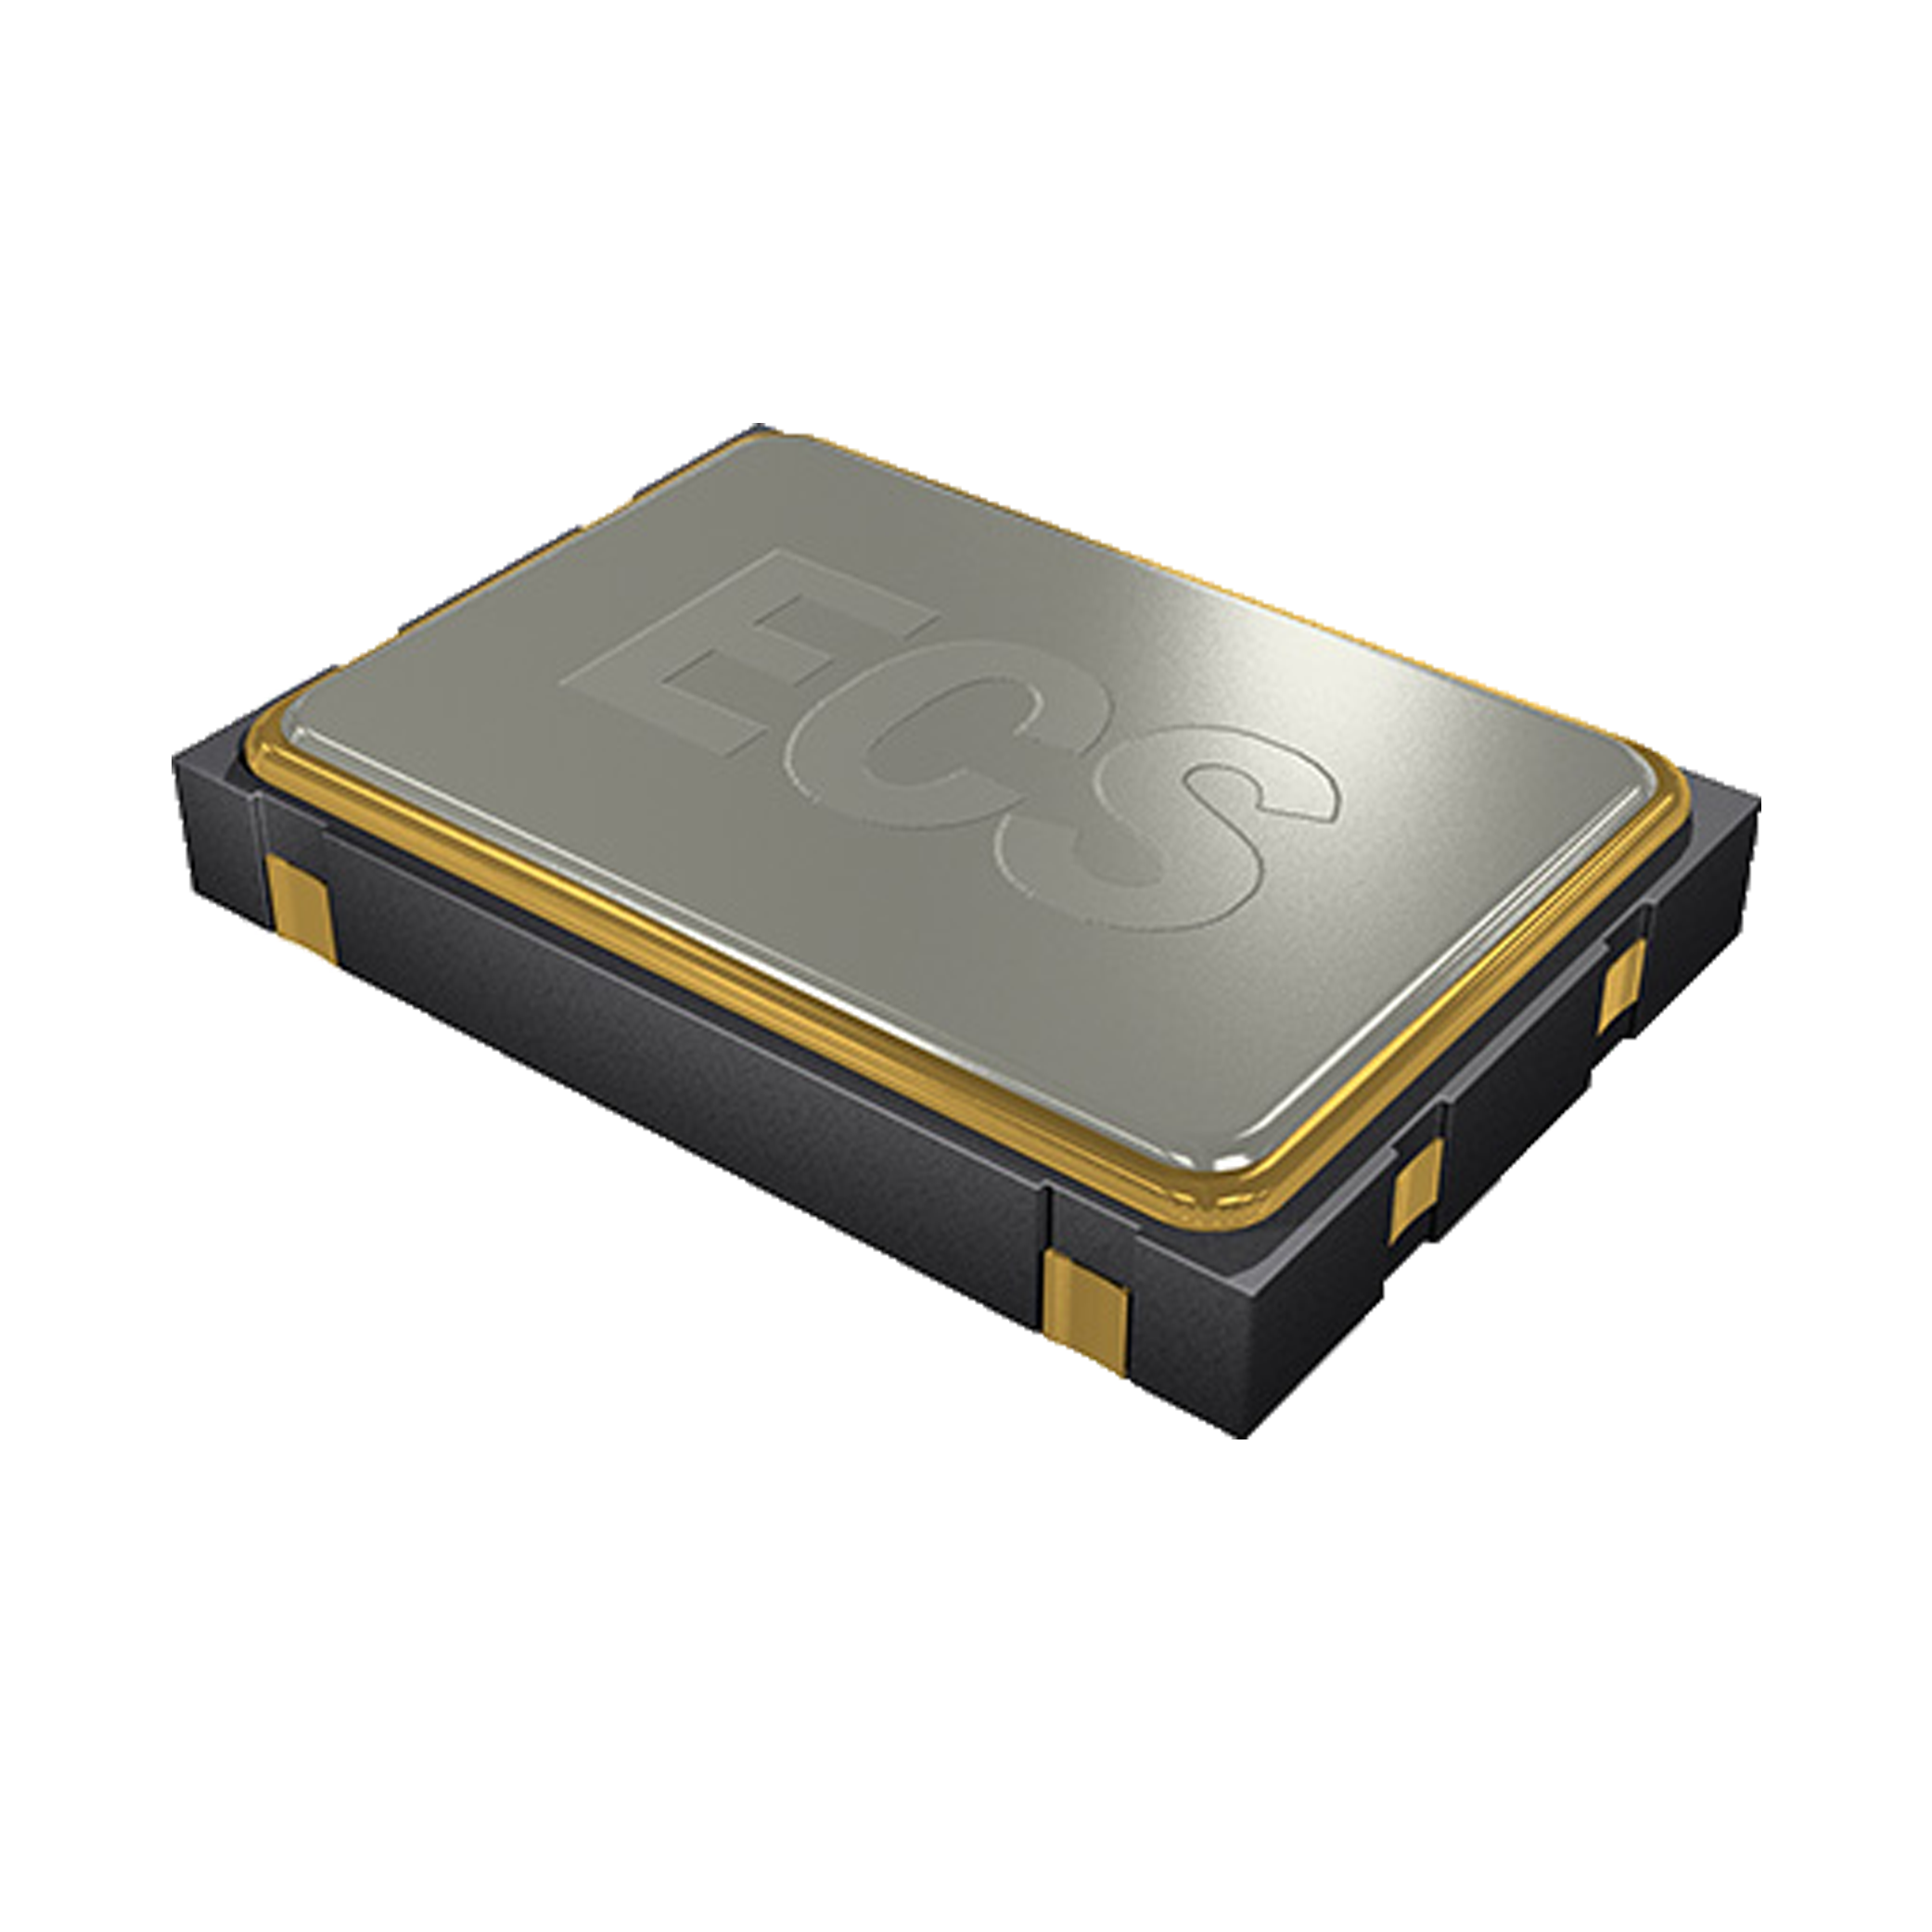 Product image for ECS-P73